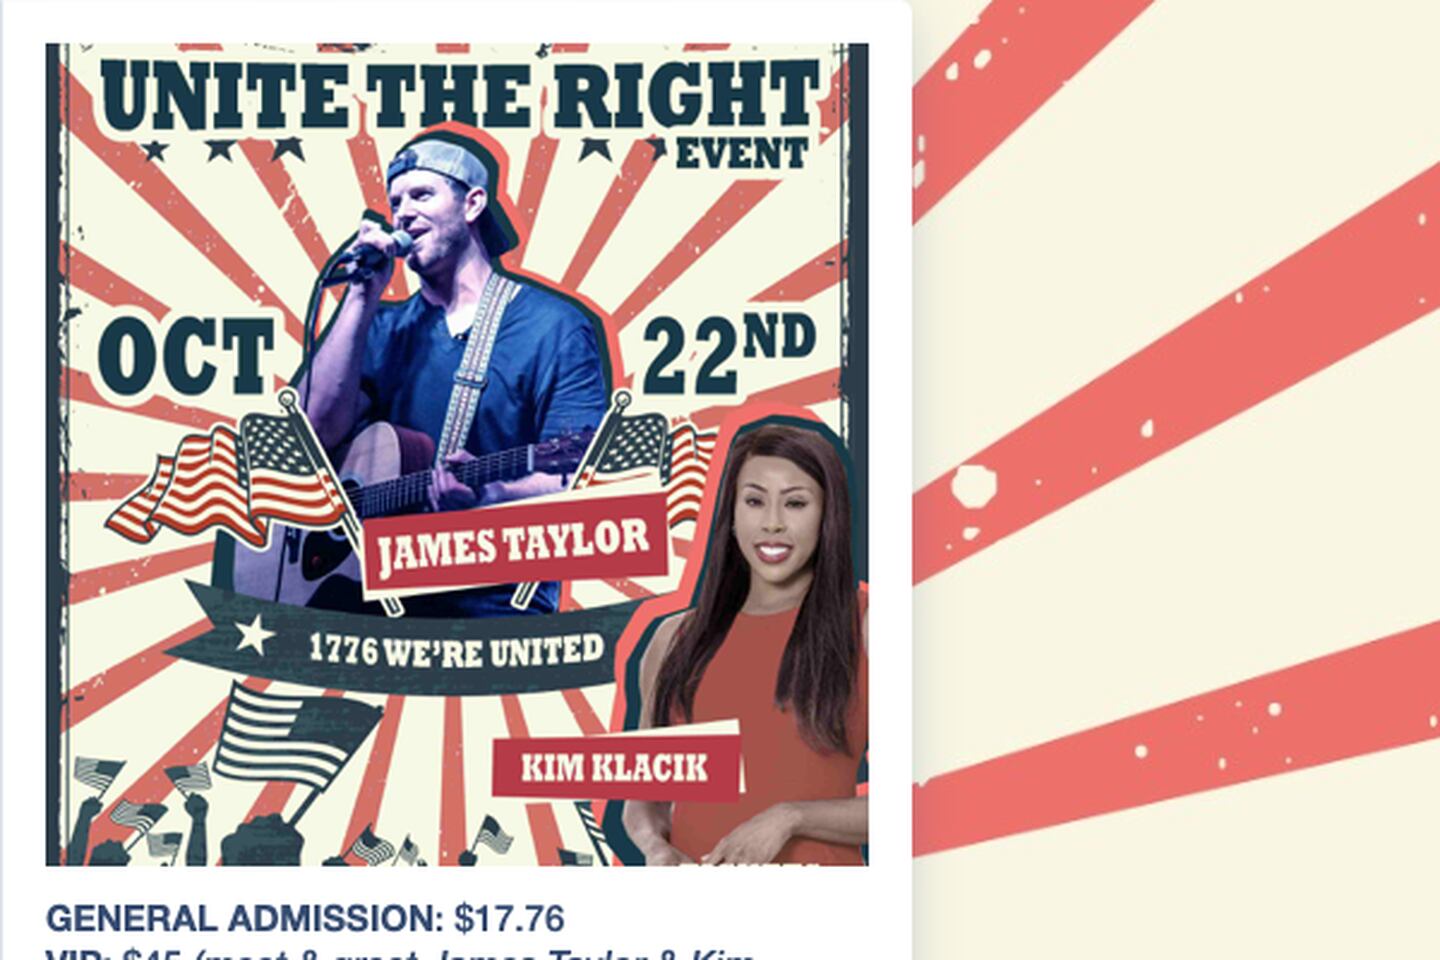 A screen grab of the Unite The Right fundraiser event